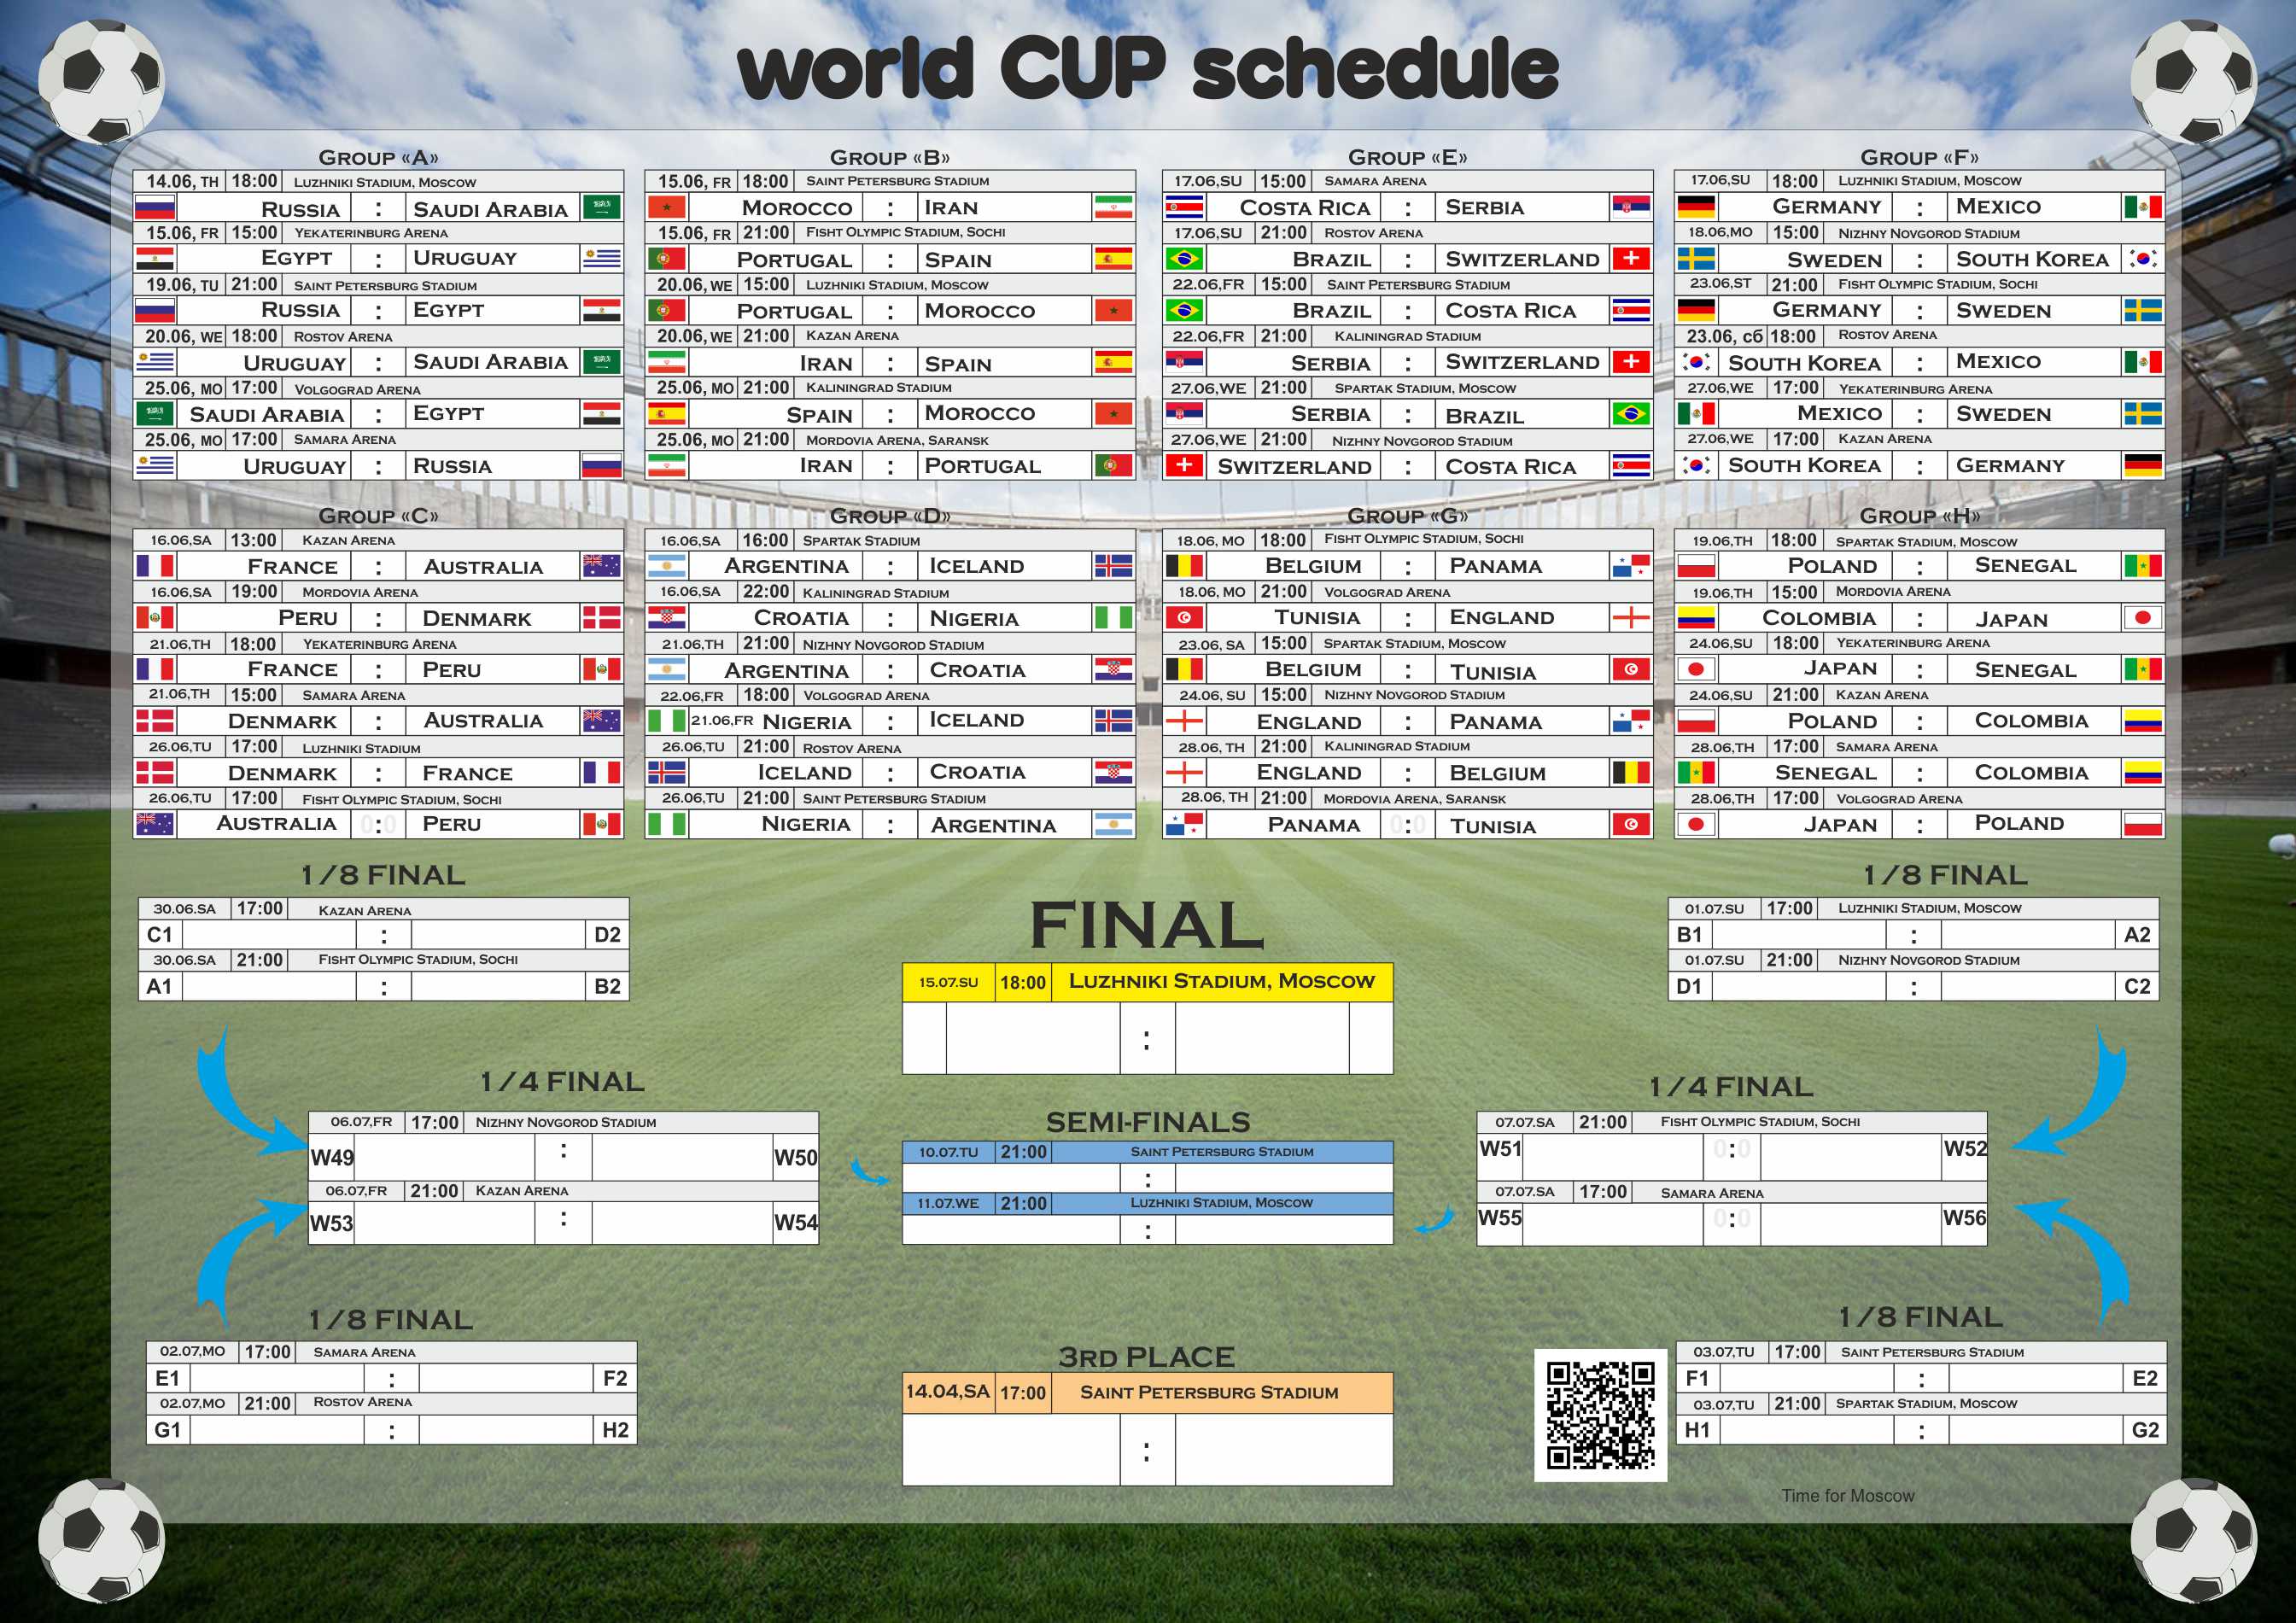 schedule in English for the world Cup